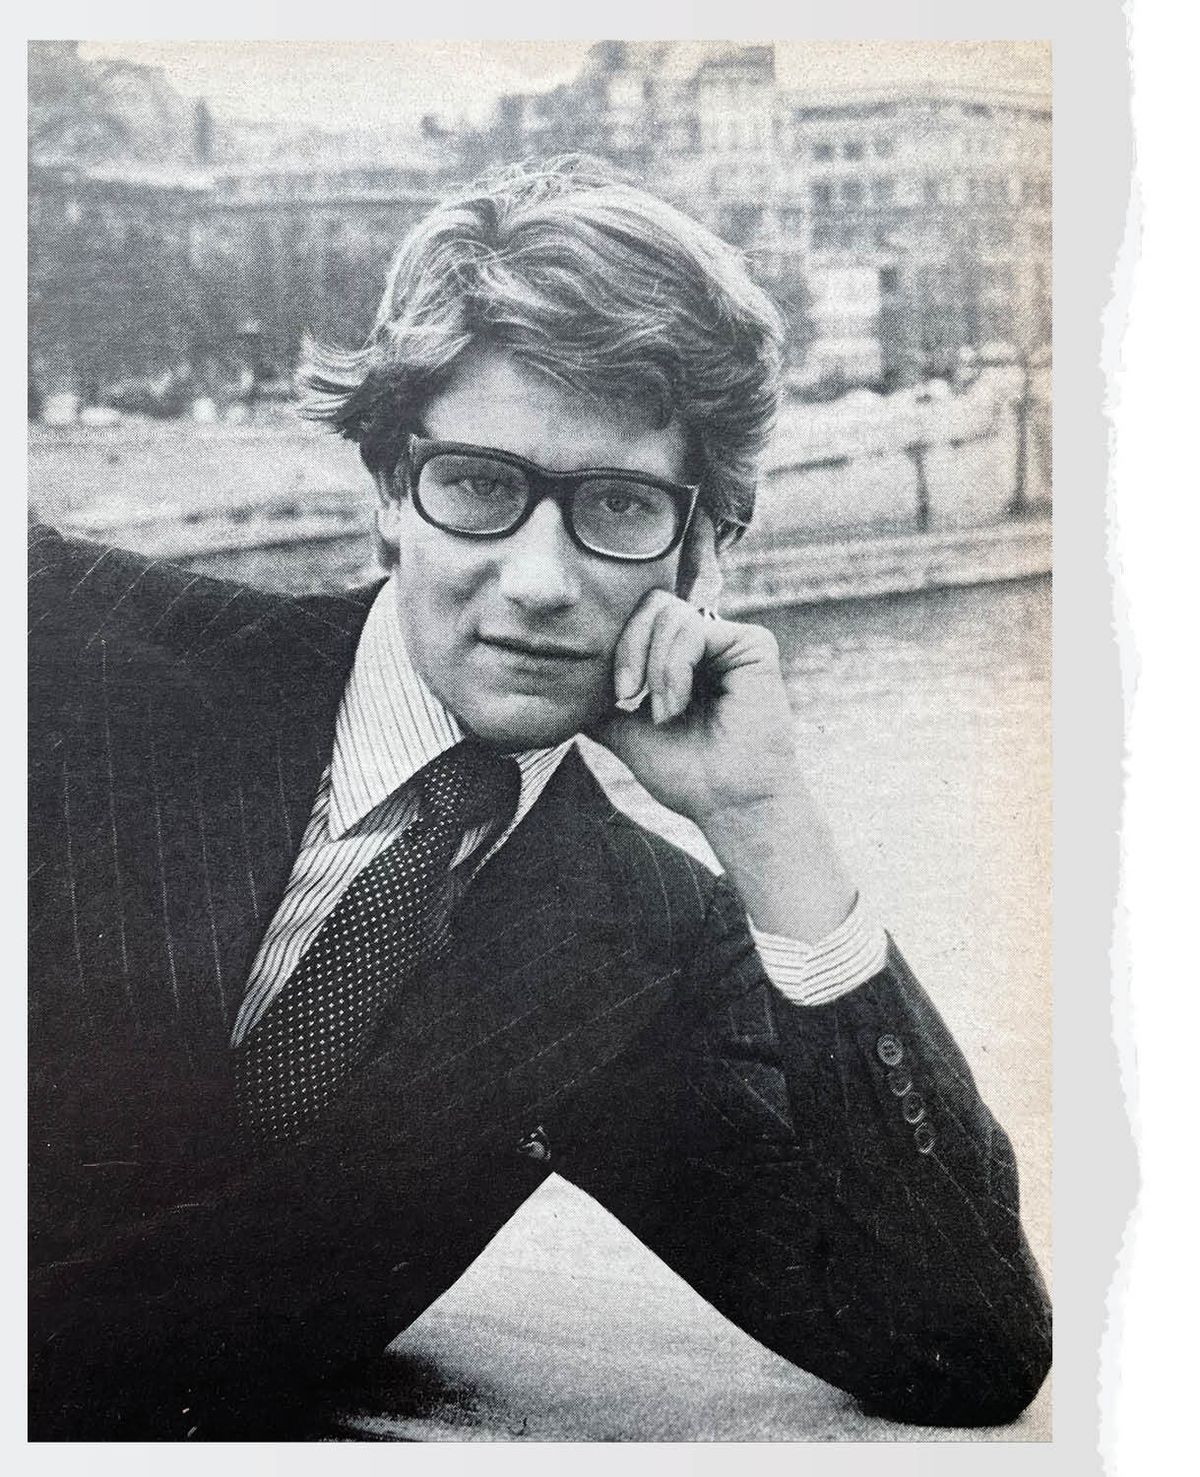 Here Are Yves Saint Laurent's Thoughts on Color 1977